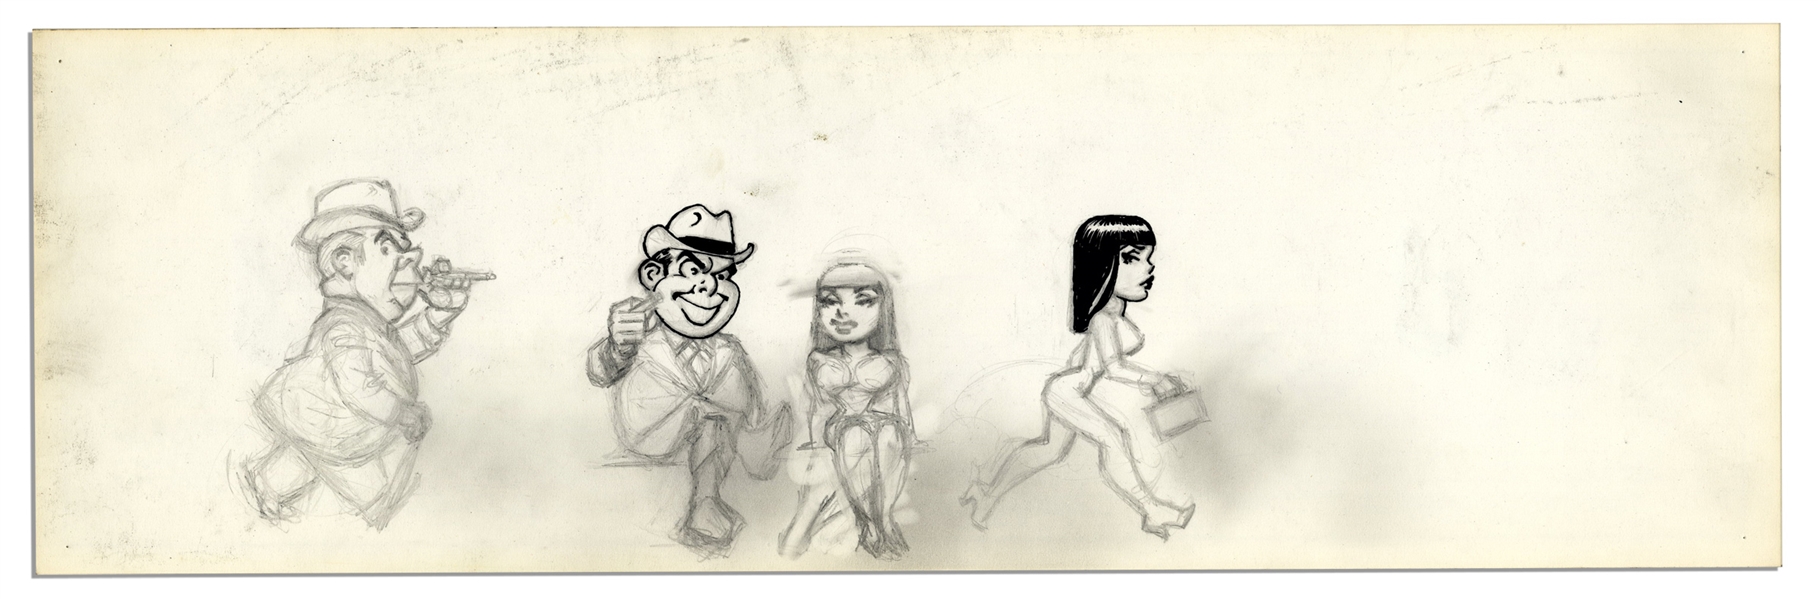 ''Li'l Abner'' Unfinished Comic Strip by Al Capp in Pencil & Black Ink -- Undated With Characters Drawn to Verso -- 19.75'' x 6.25'' -- Very Good -- From the Al Capp Estate